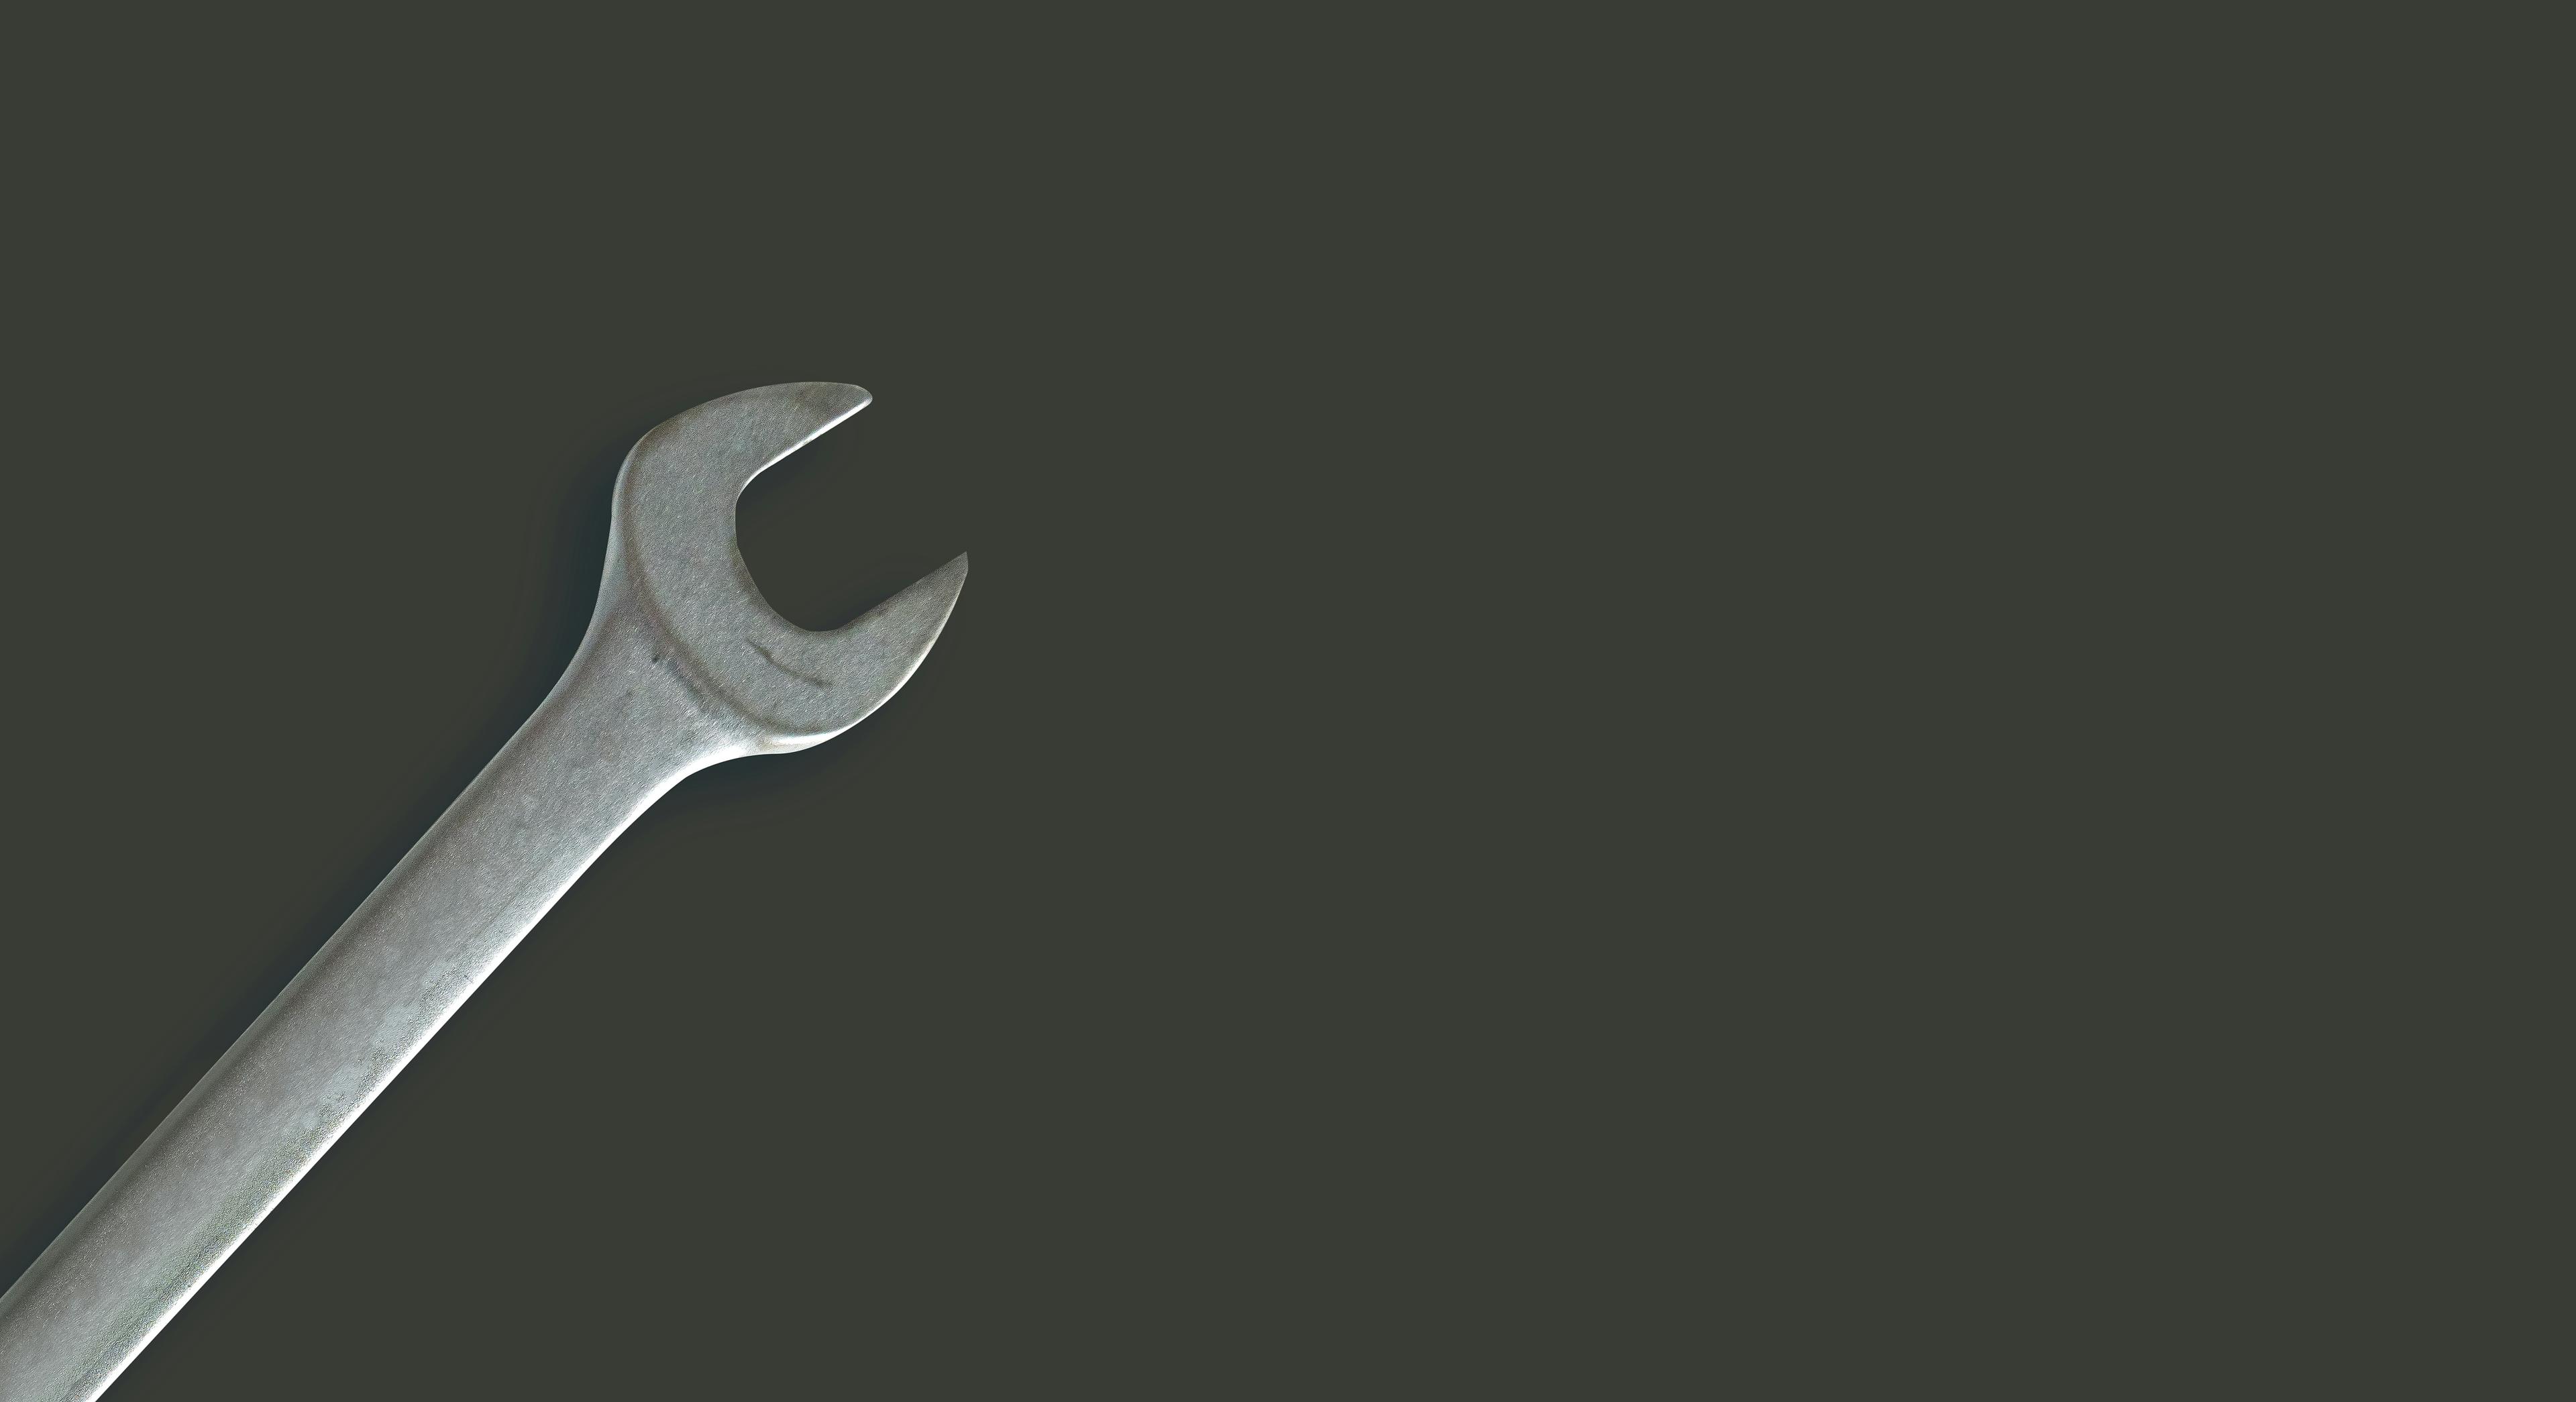 A spanner against a black background.